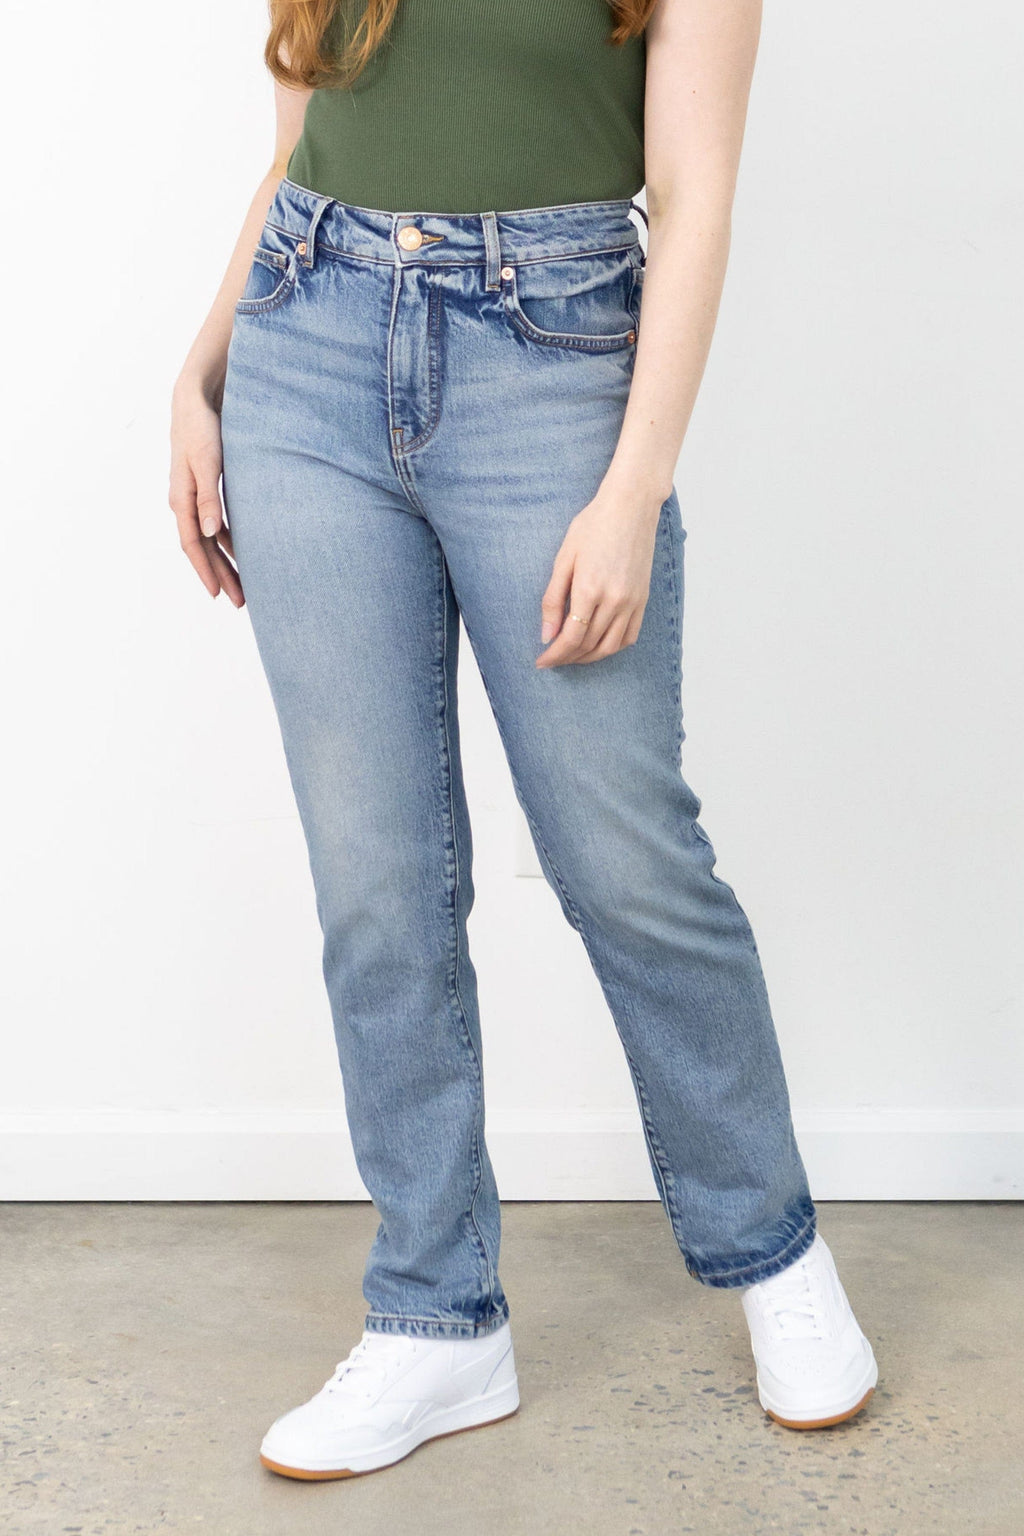 Levi's High Waisted Taper Jeans Women's Ankle Length Bruised Ego